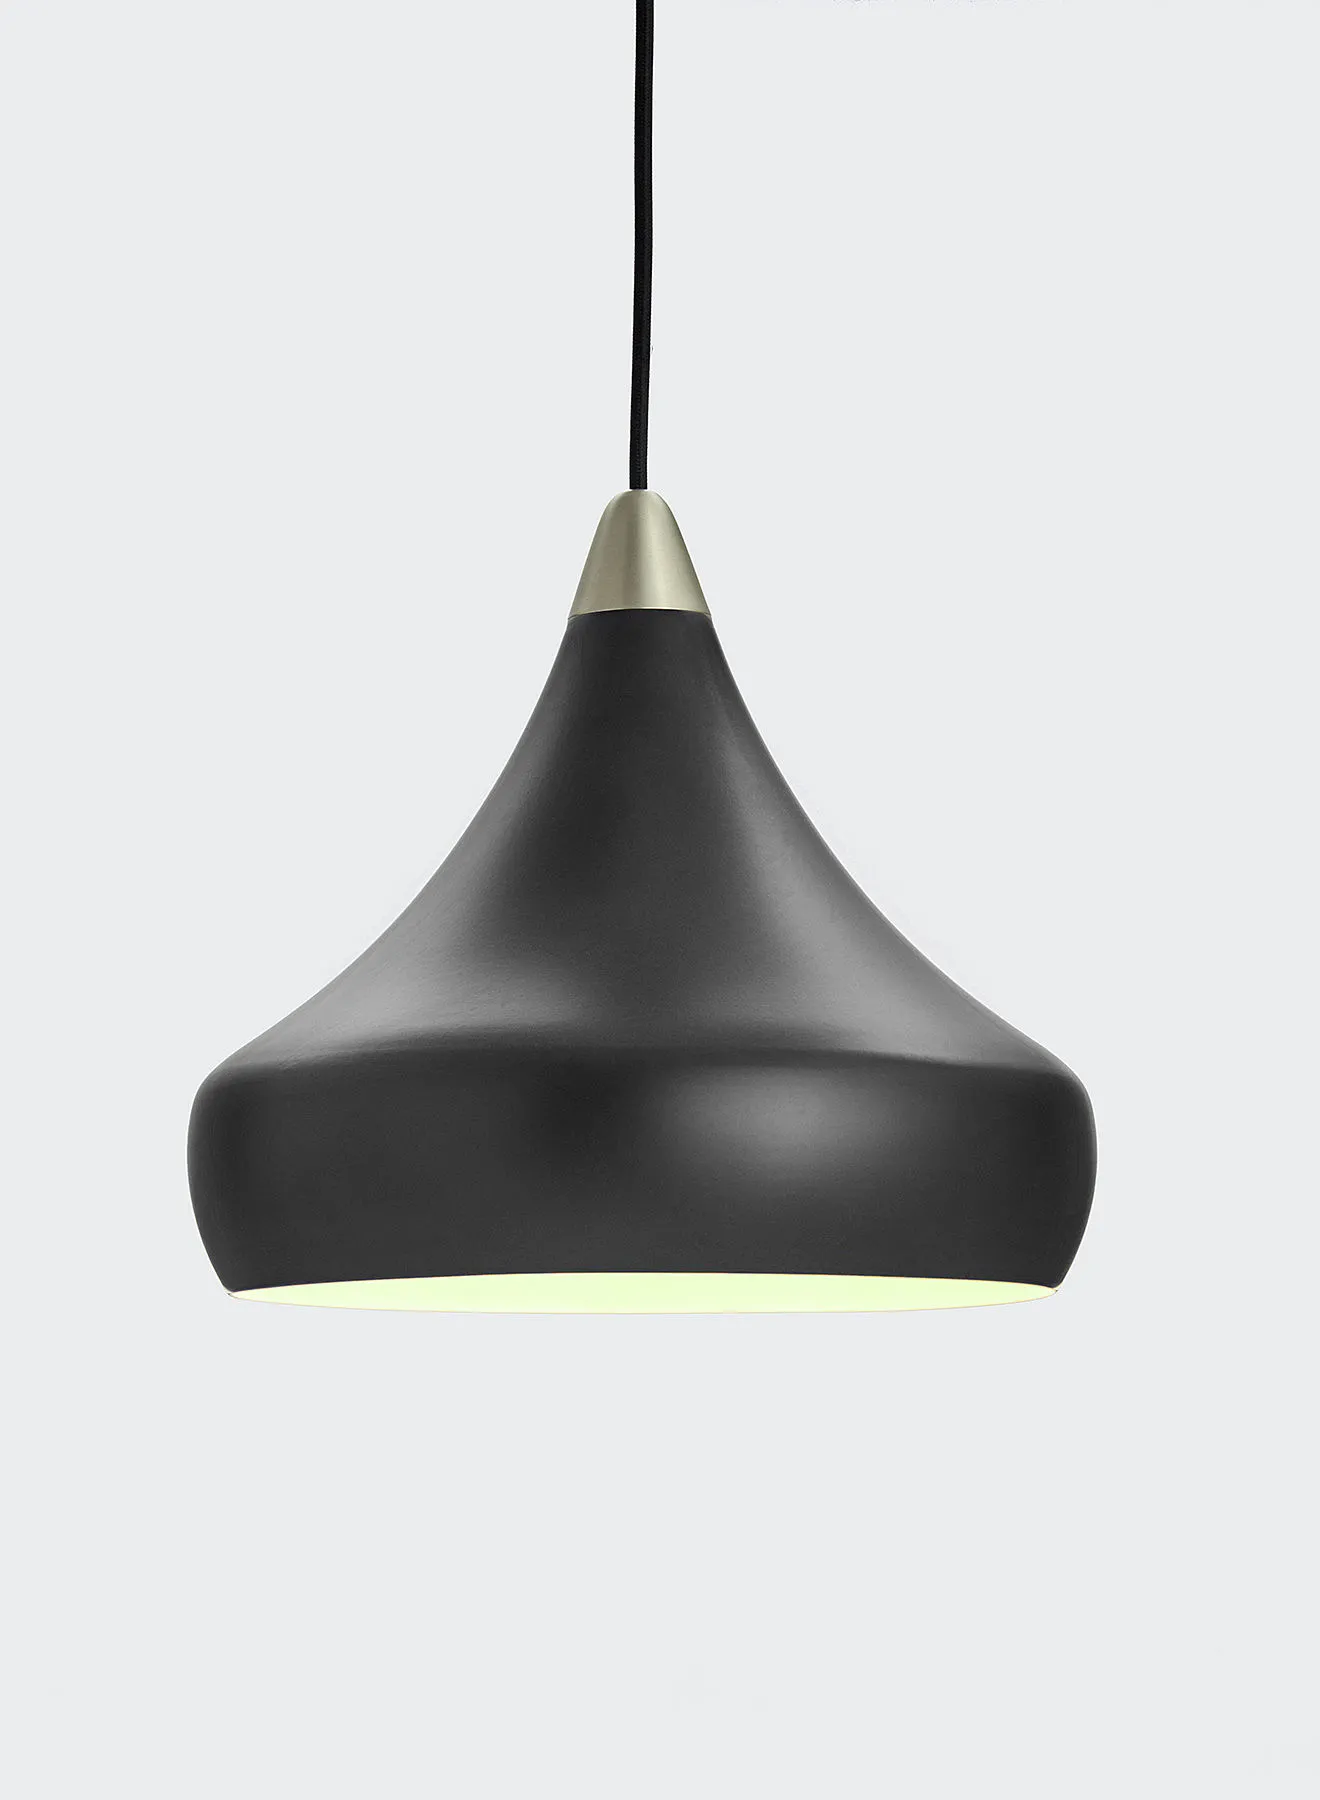 Switch Decorative Pendant Lamp Unique Luxury Quality Material for the Perfect Stylish Home PL010310 Black 30cm